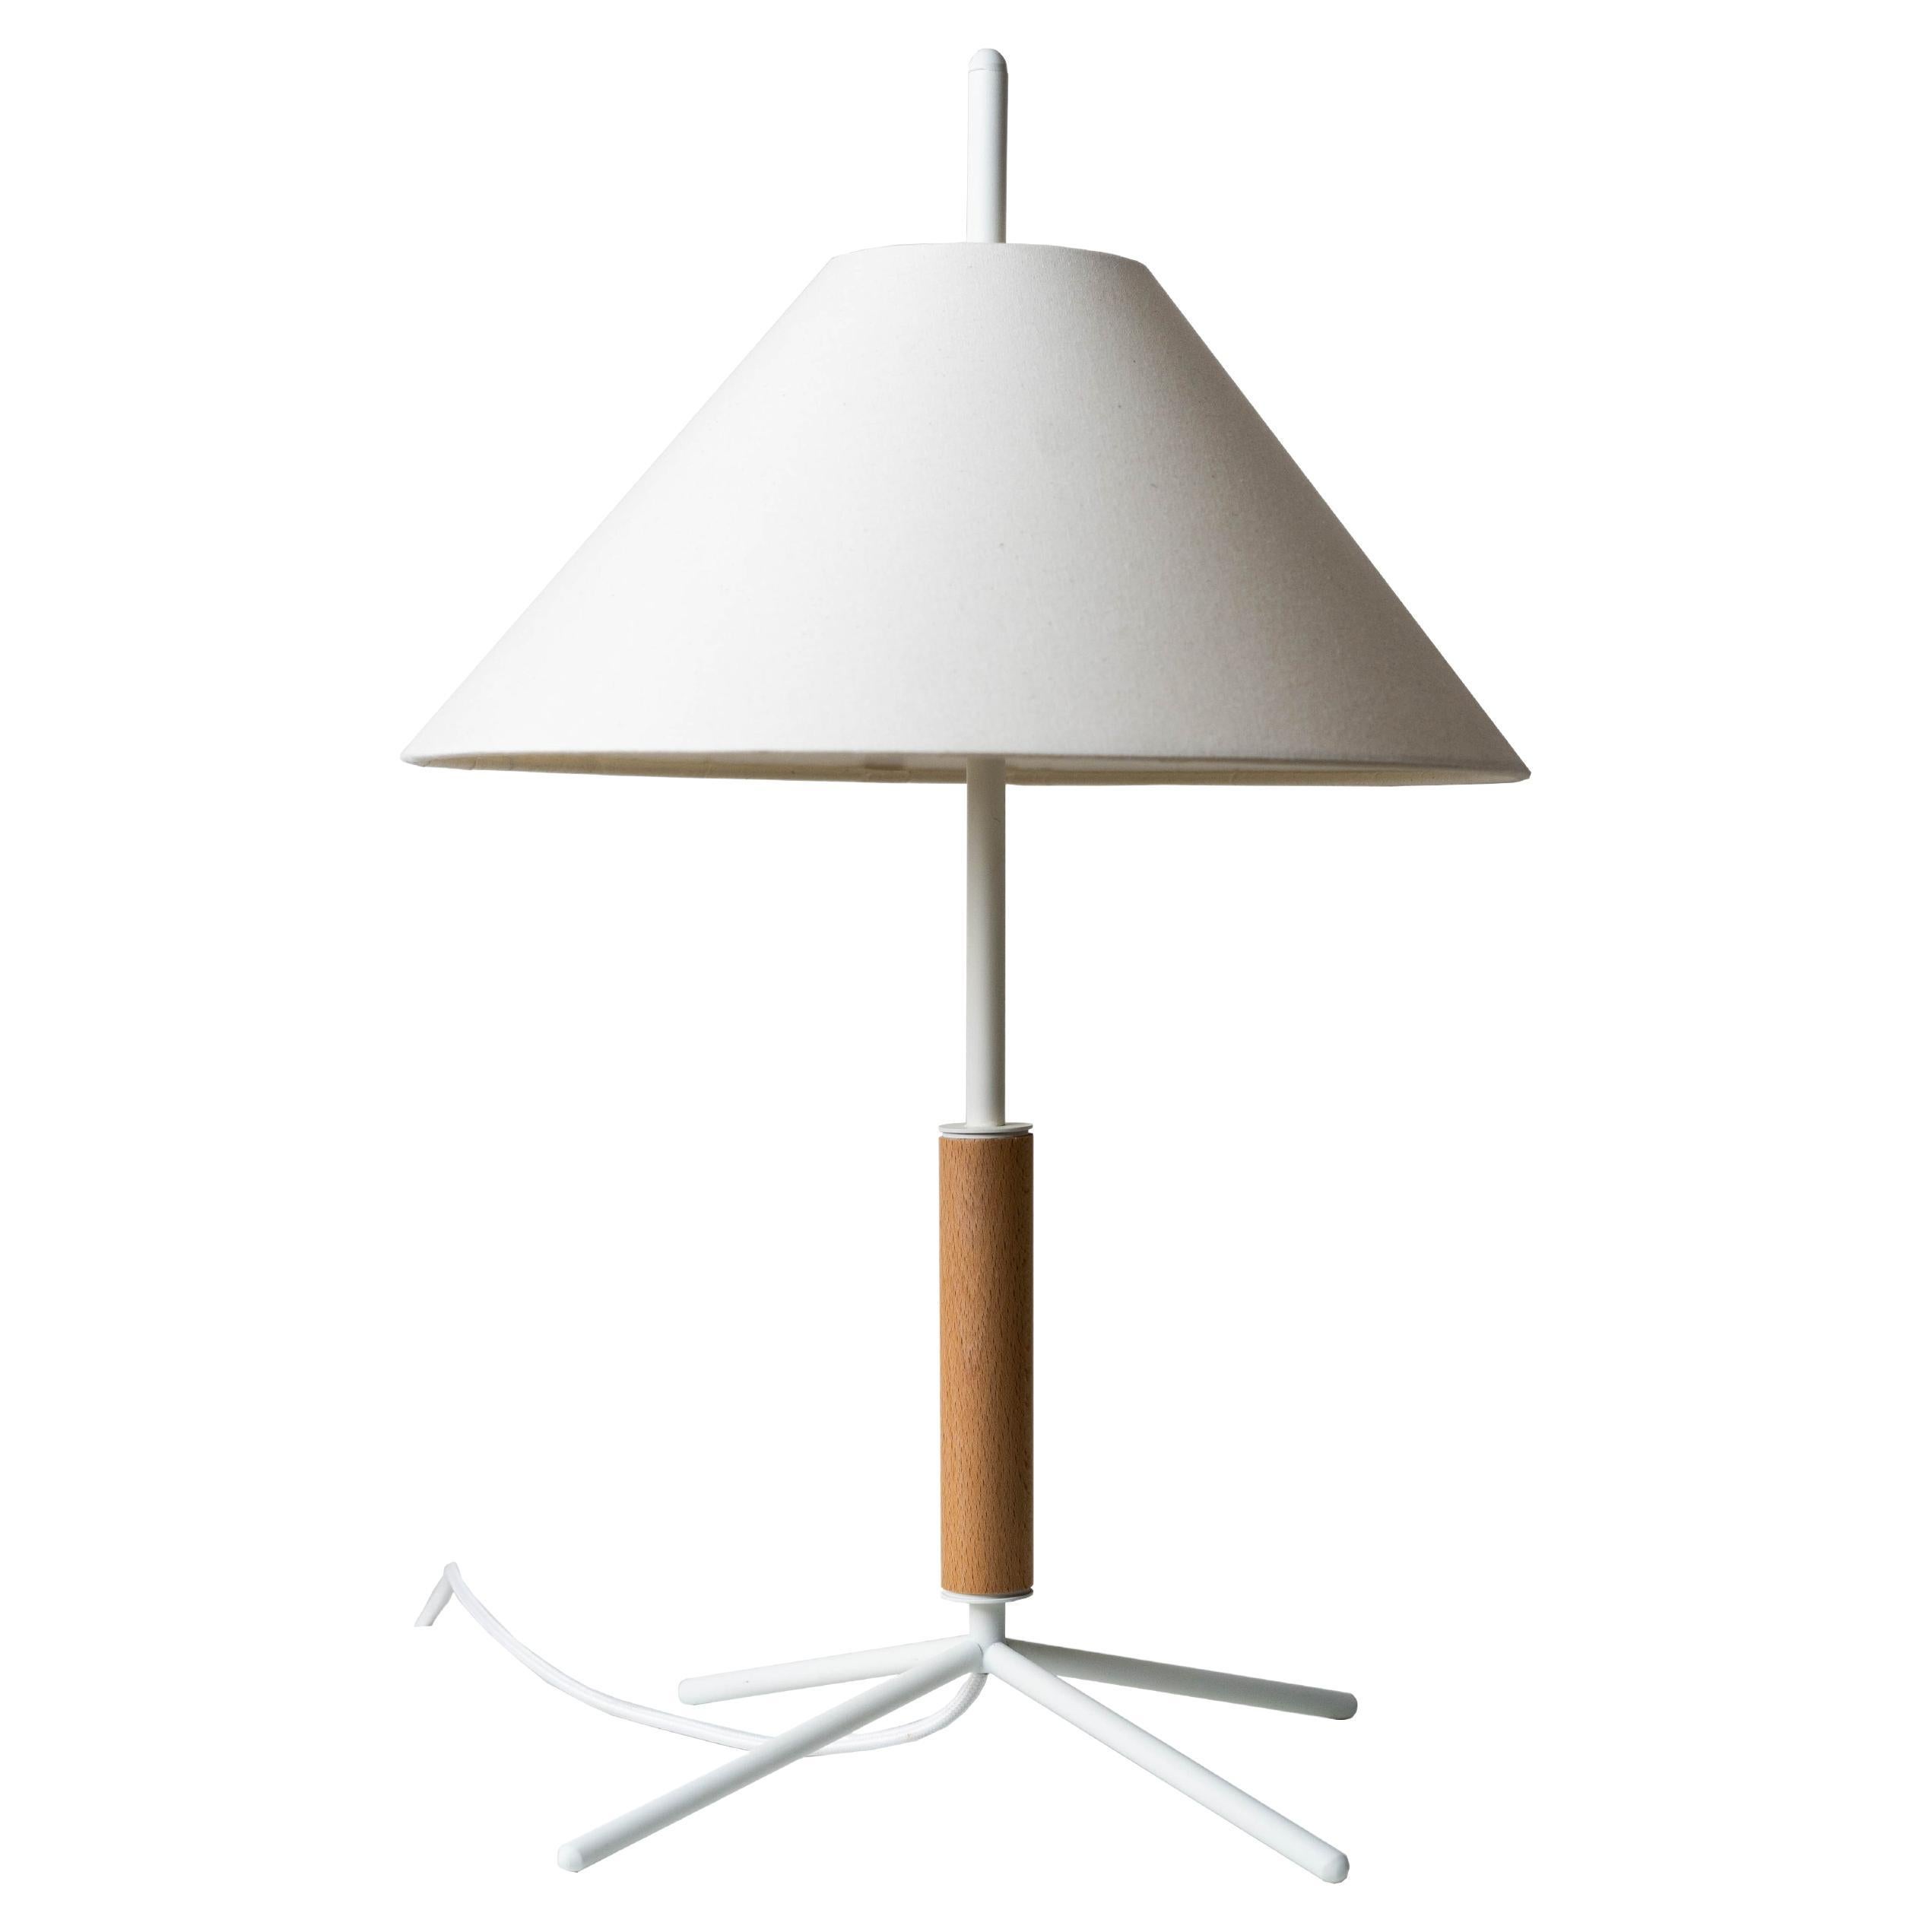 Contemporary, Handmade Table Lamp, White, Fabric, Wood, by Mediterranean Objects en vente